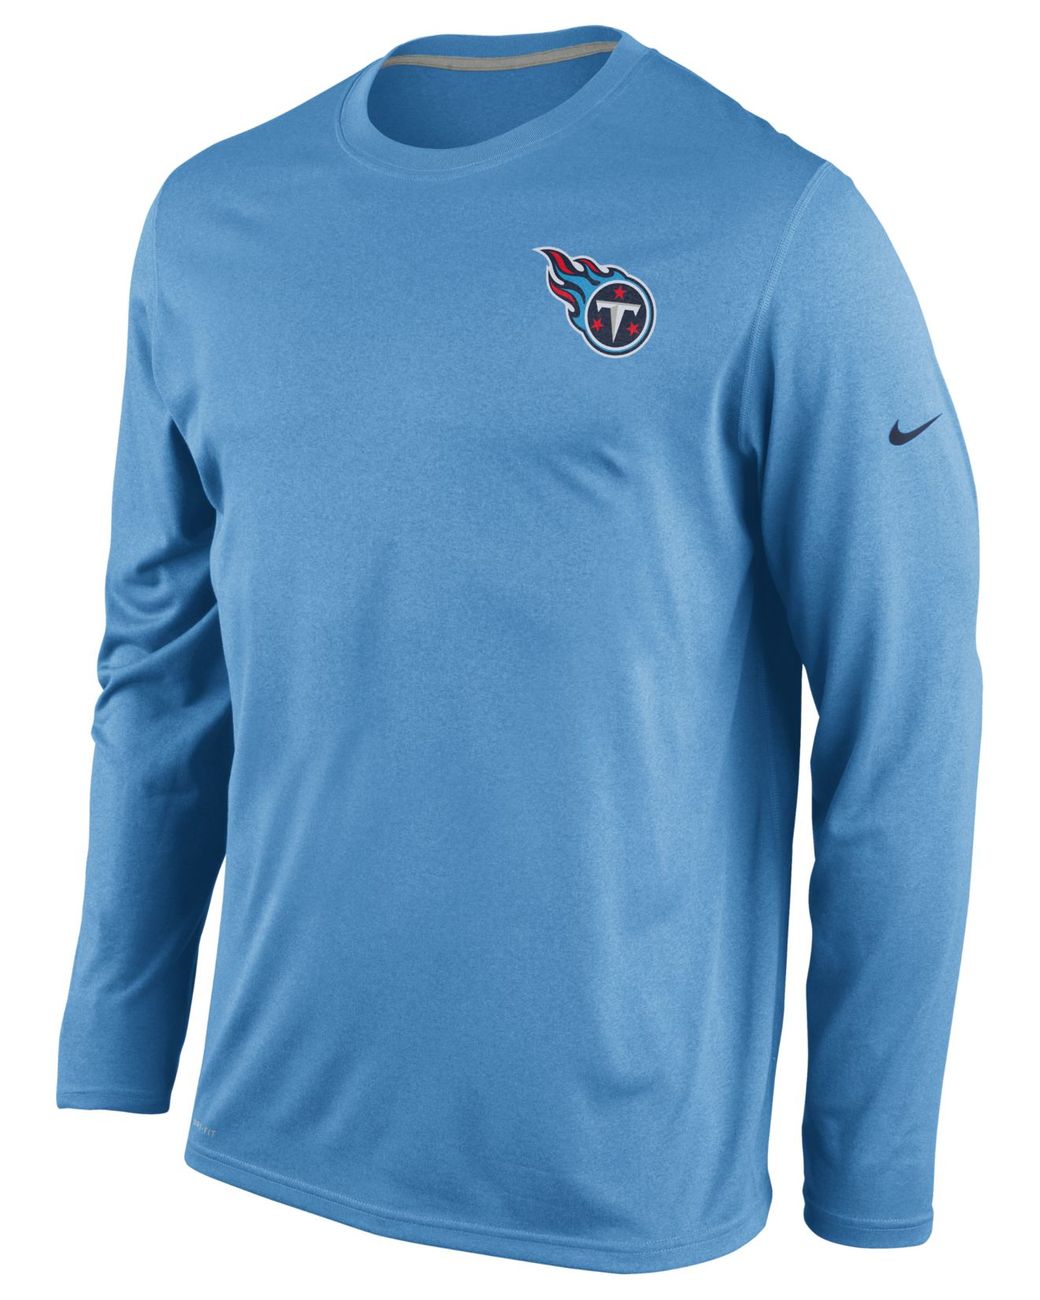 Nike Men'S Long-Sleeve Tennessee Titans Dri-Fit T-Shirt in Blue for Men